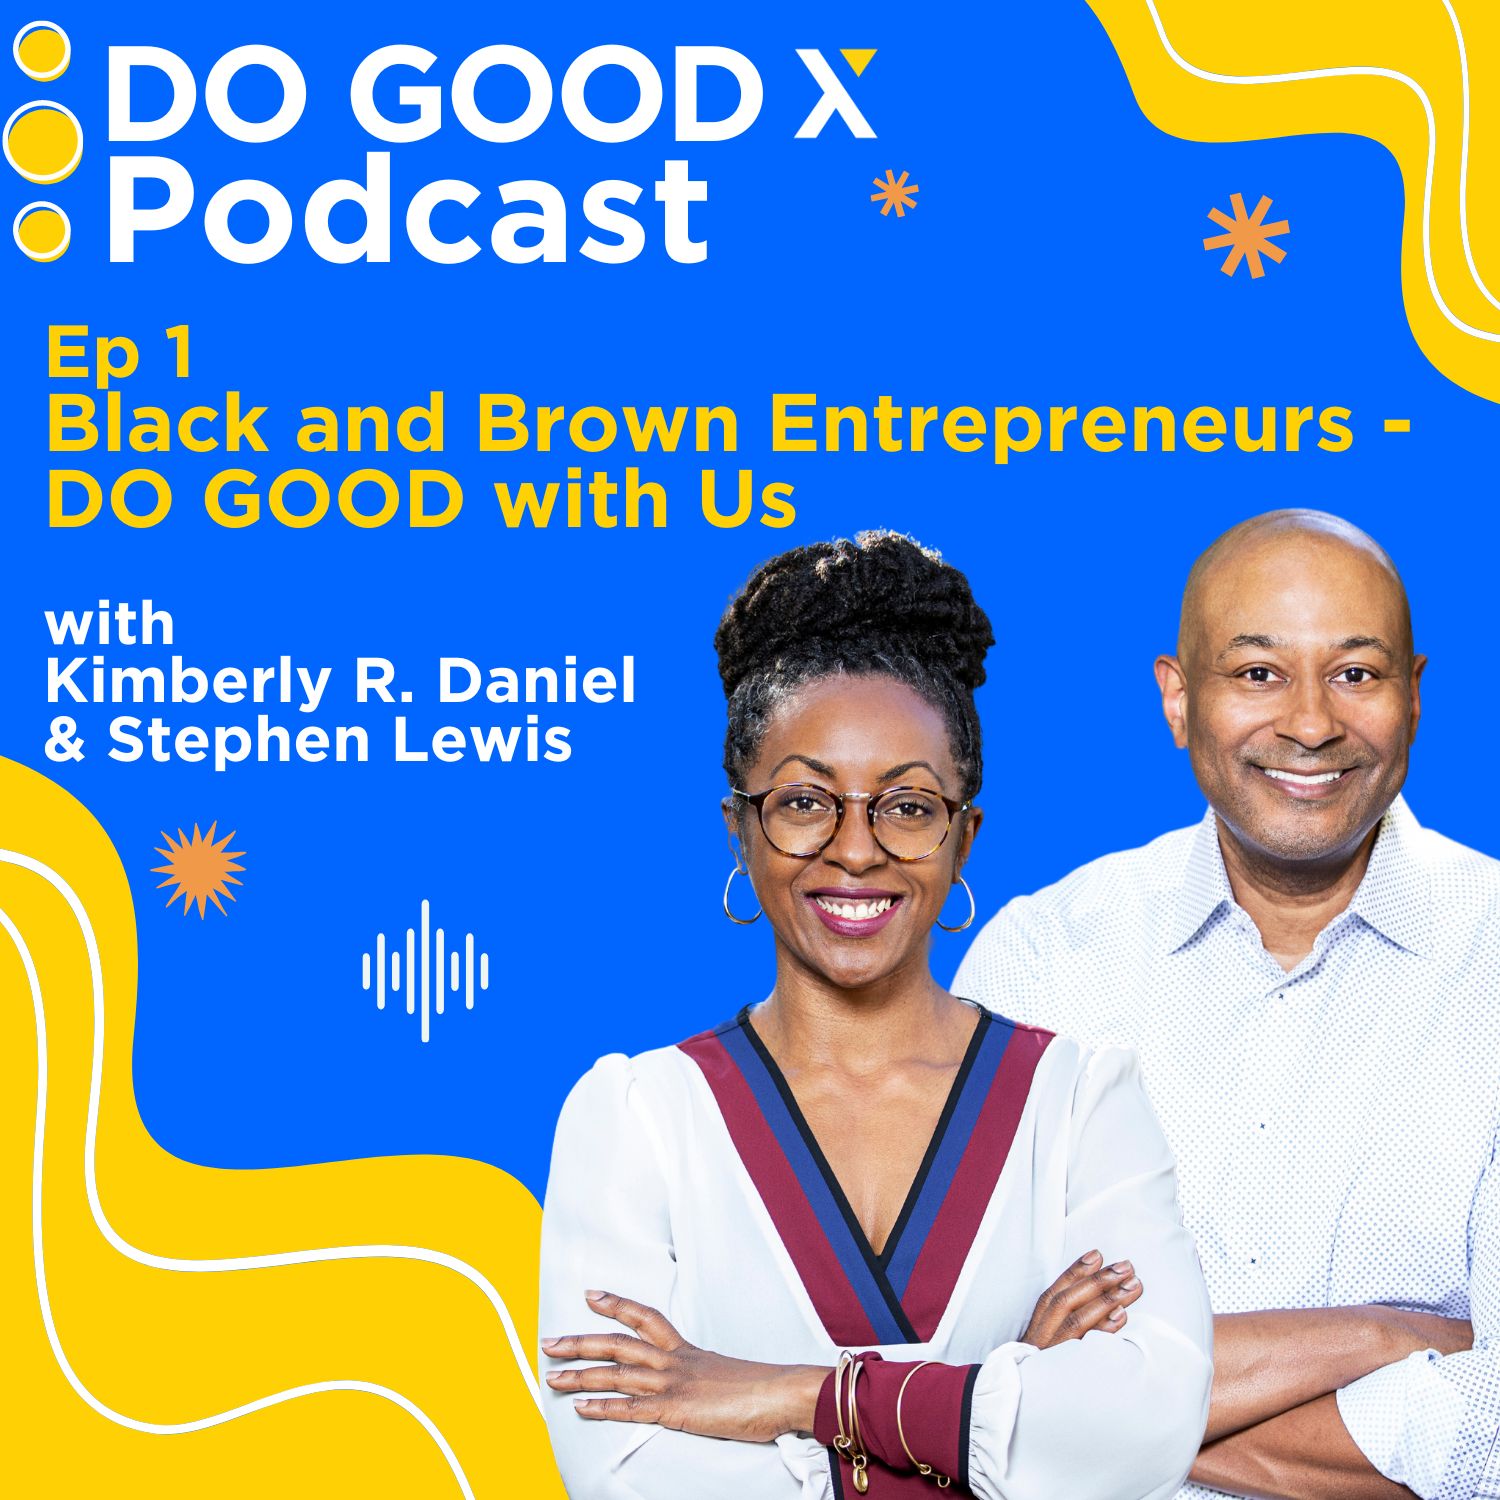 Ep 1 Black and Brown Entrepreneurs - DO GOOD with Us